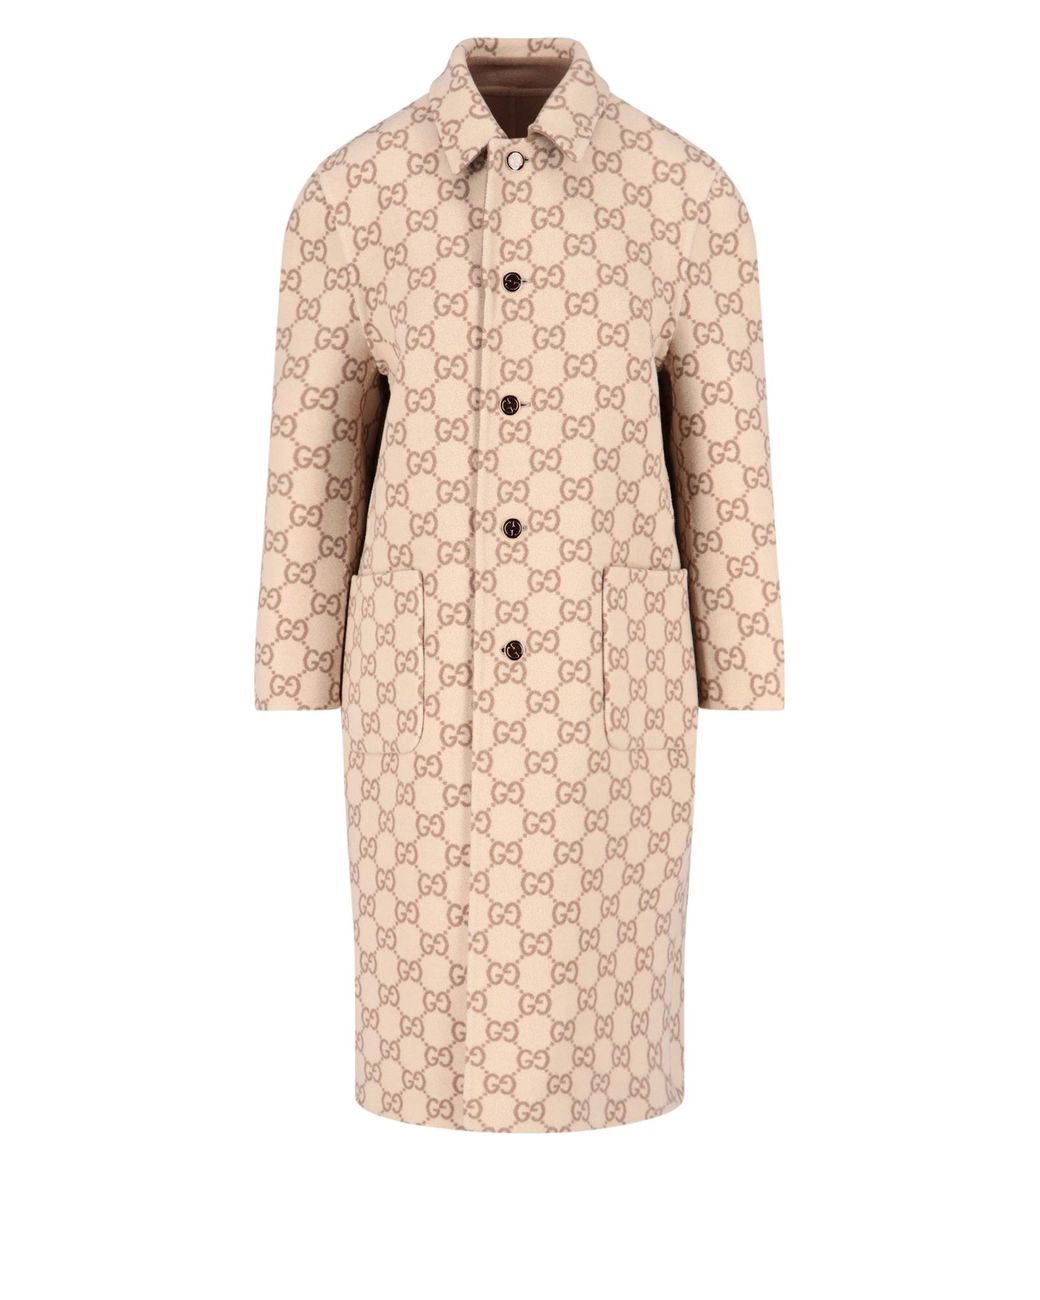 Gucci 'GG' Reversible Coat in Natural | Lyst